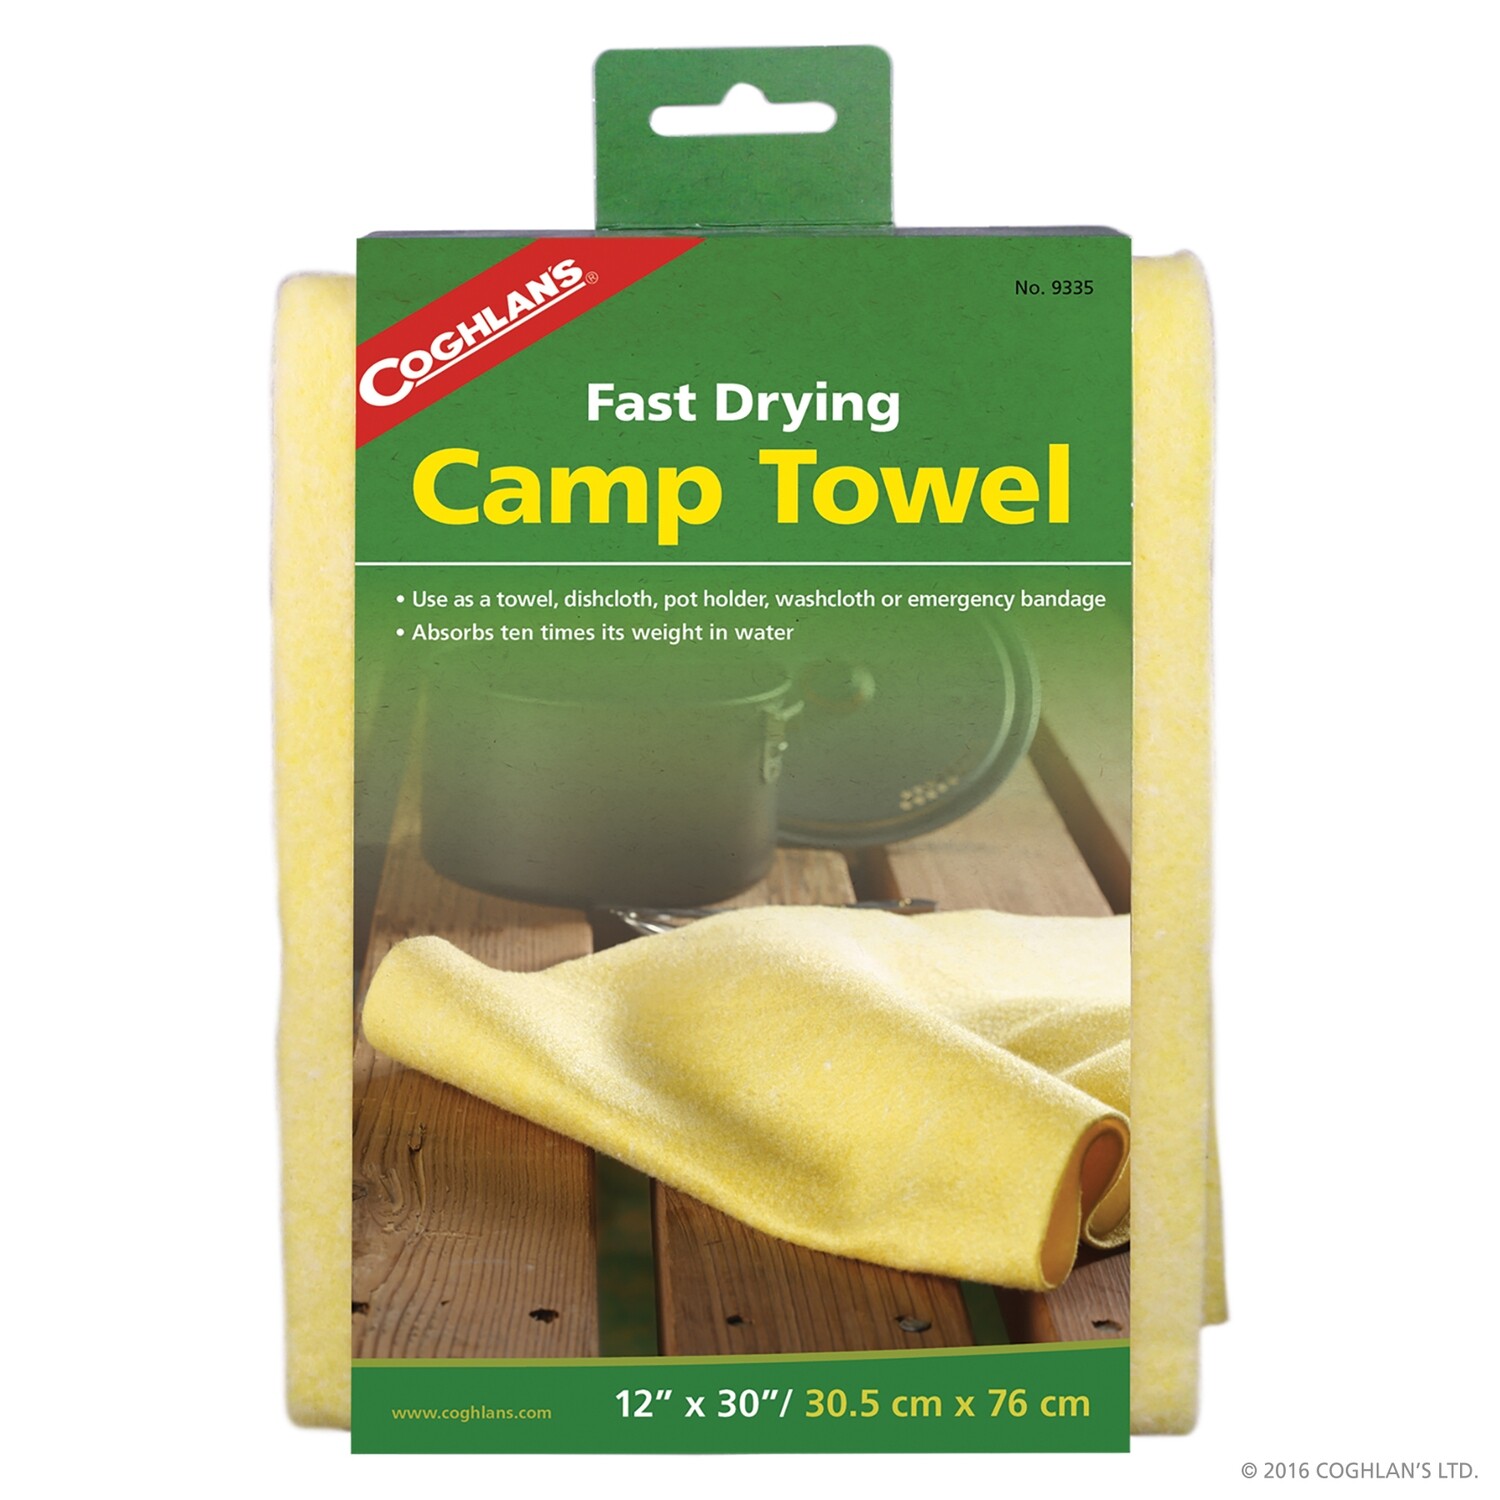 Coghlan's Fast Drying Camp Towel